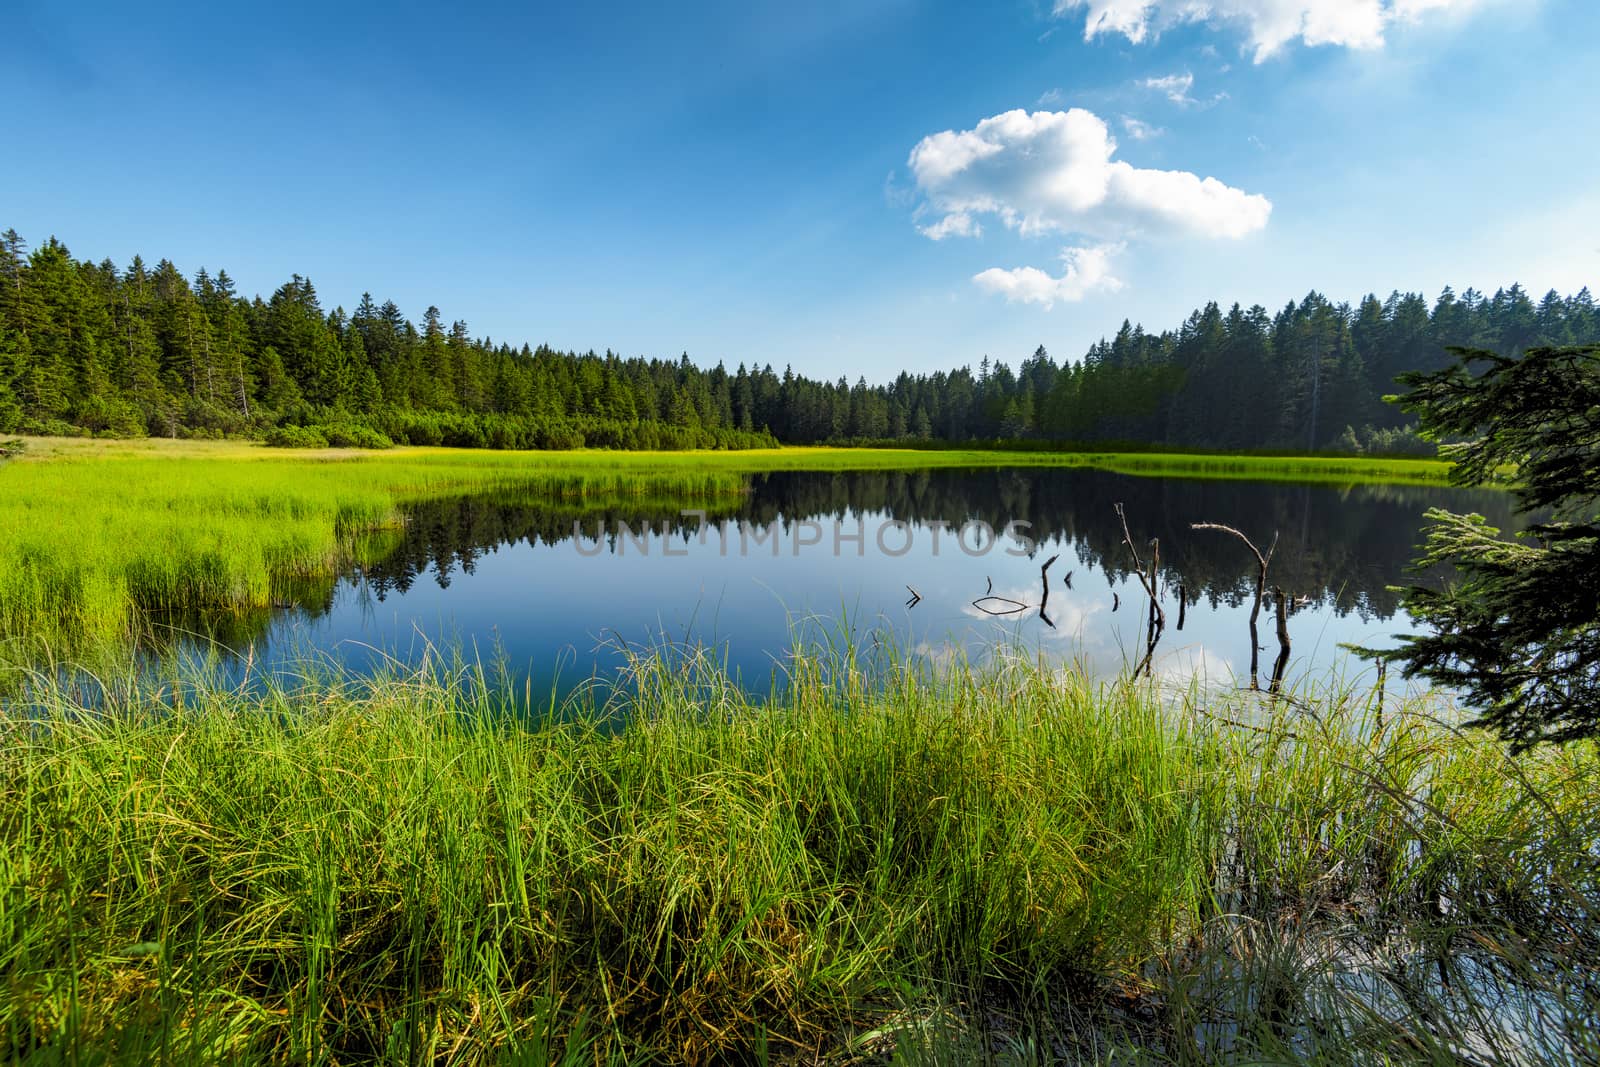 Lake on top of mountain, dark colored water and vibrant green grass, surrounded with trees, Crno jezero or Black lake is a popular hiking destination on Pohorje, reflection of sky in water